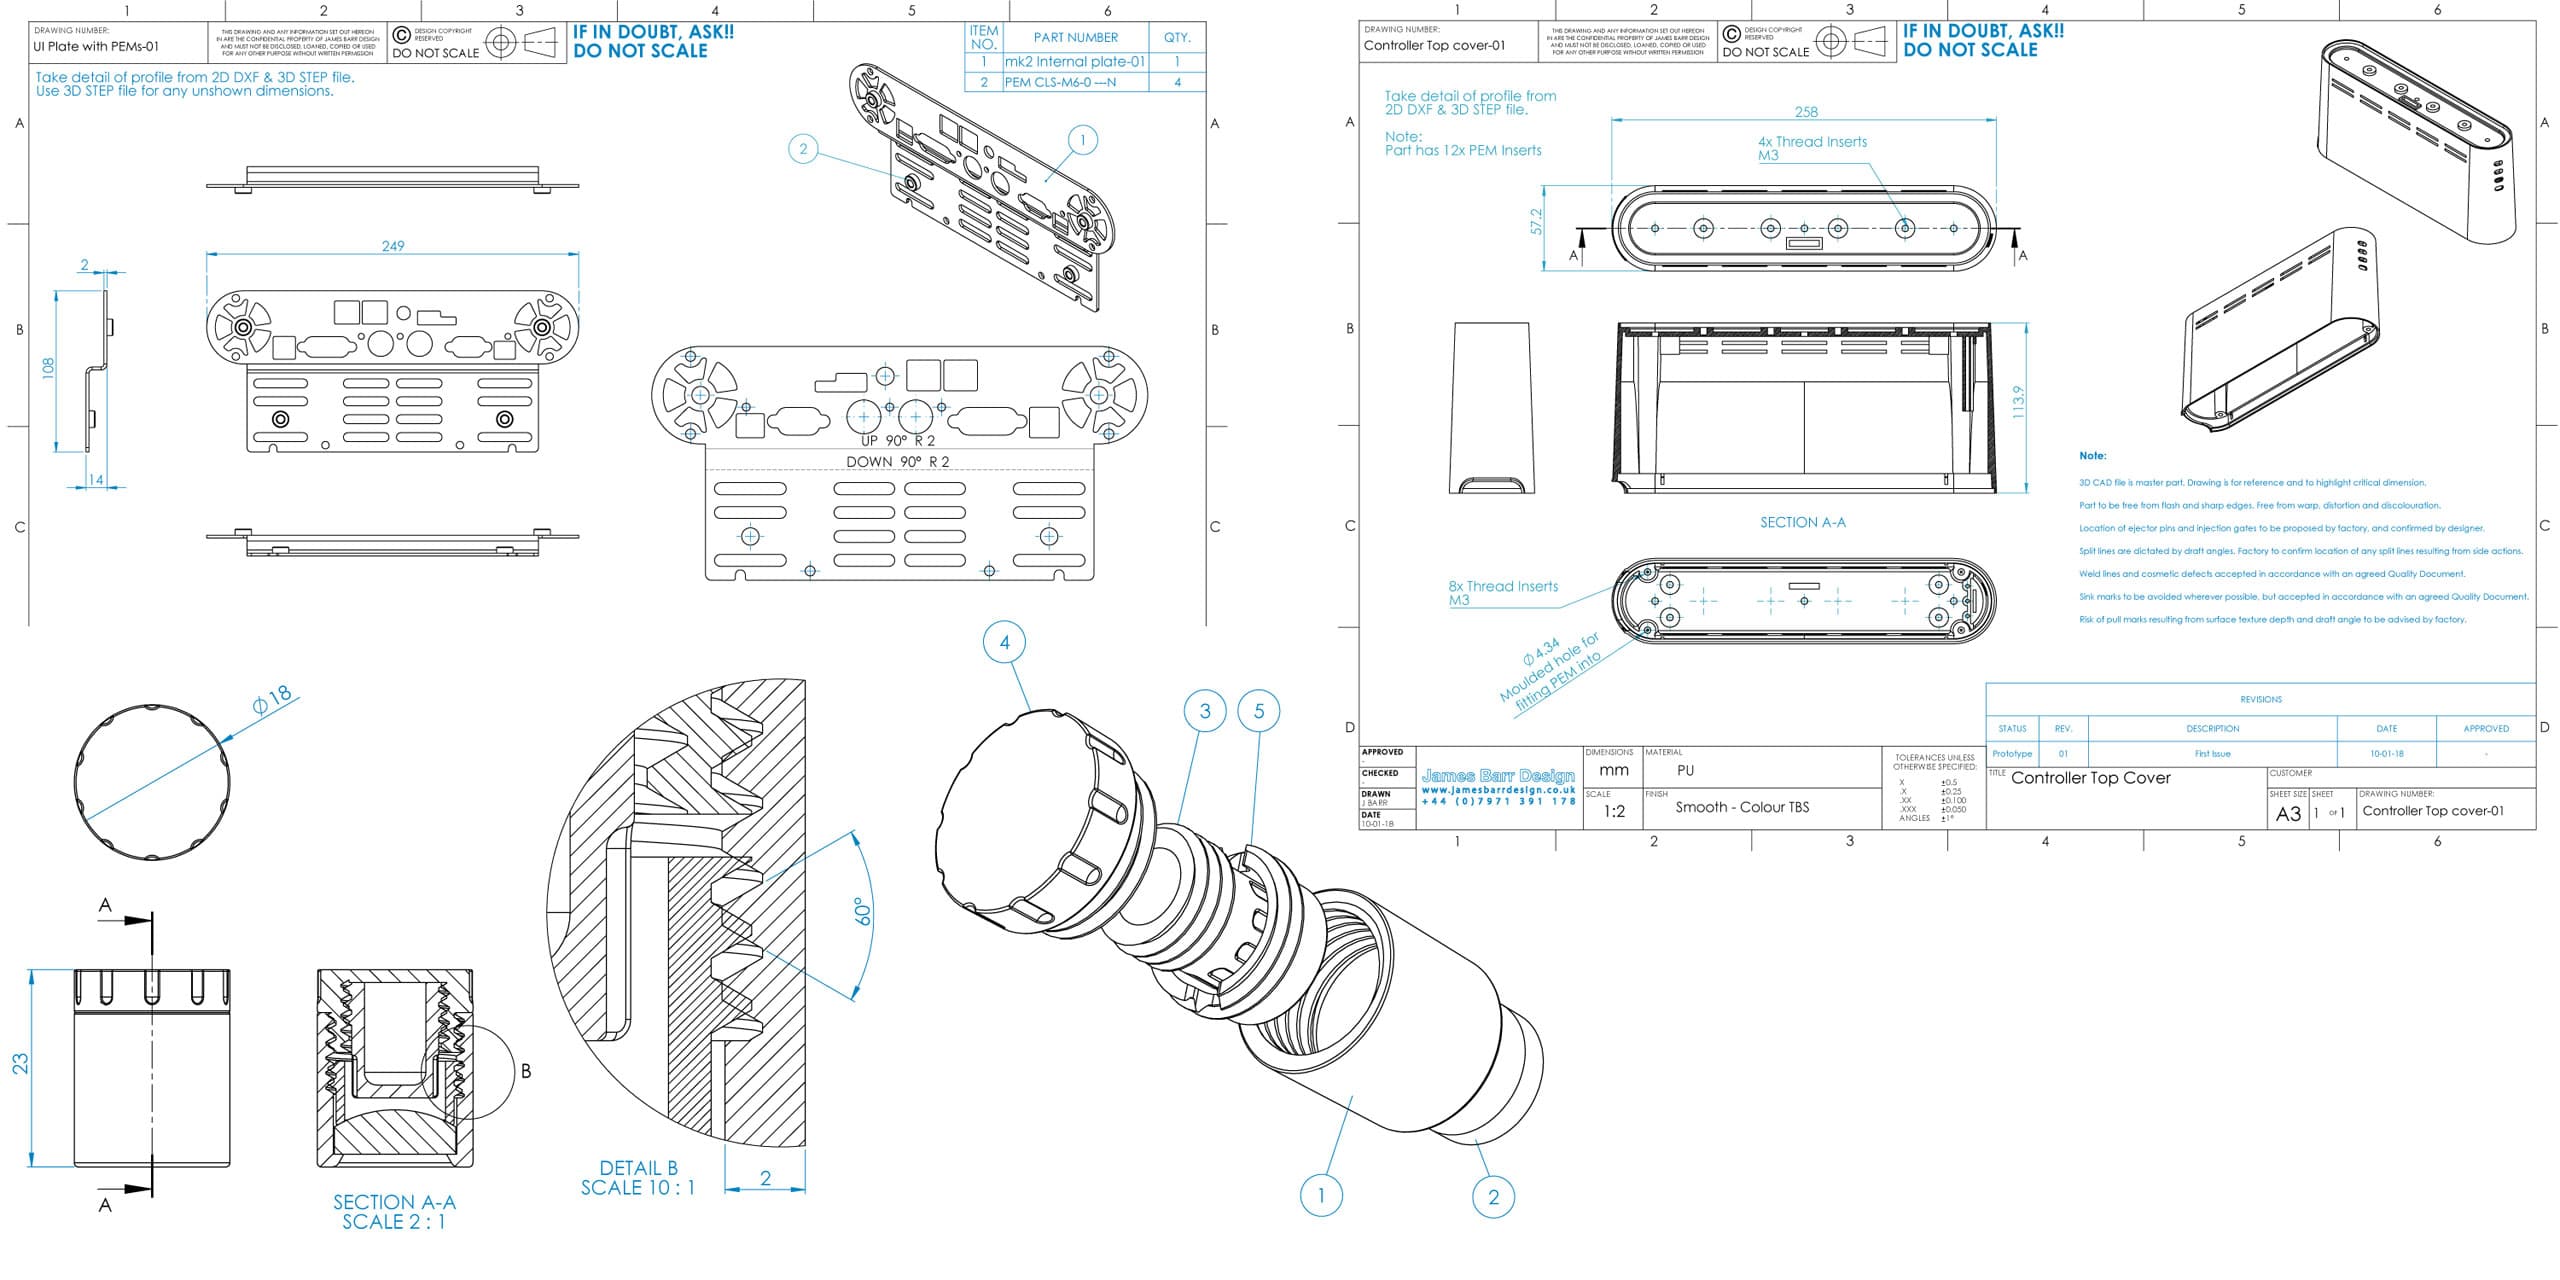 We use SolidWorks to create control drawings